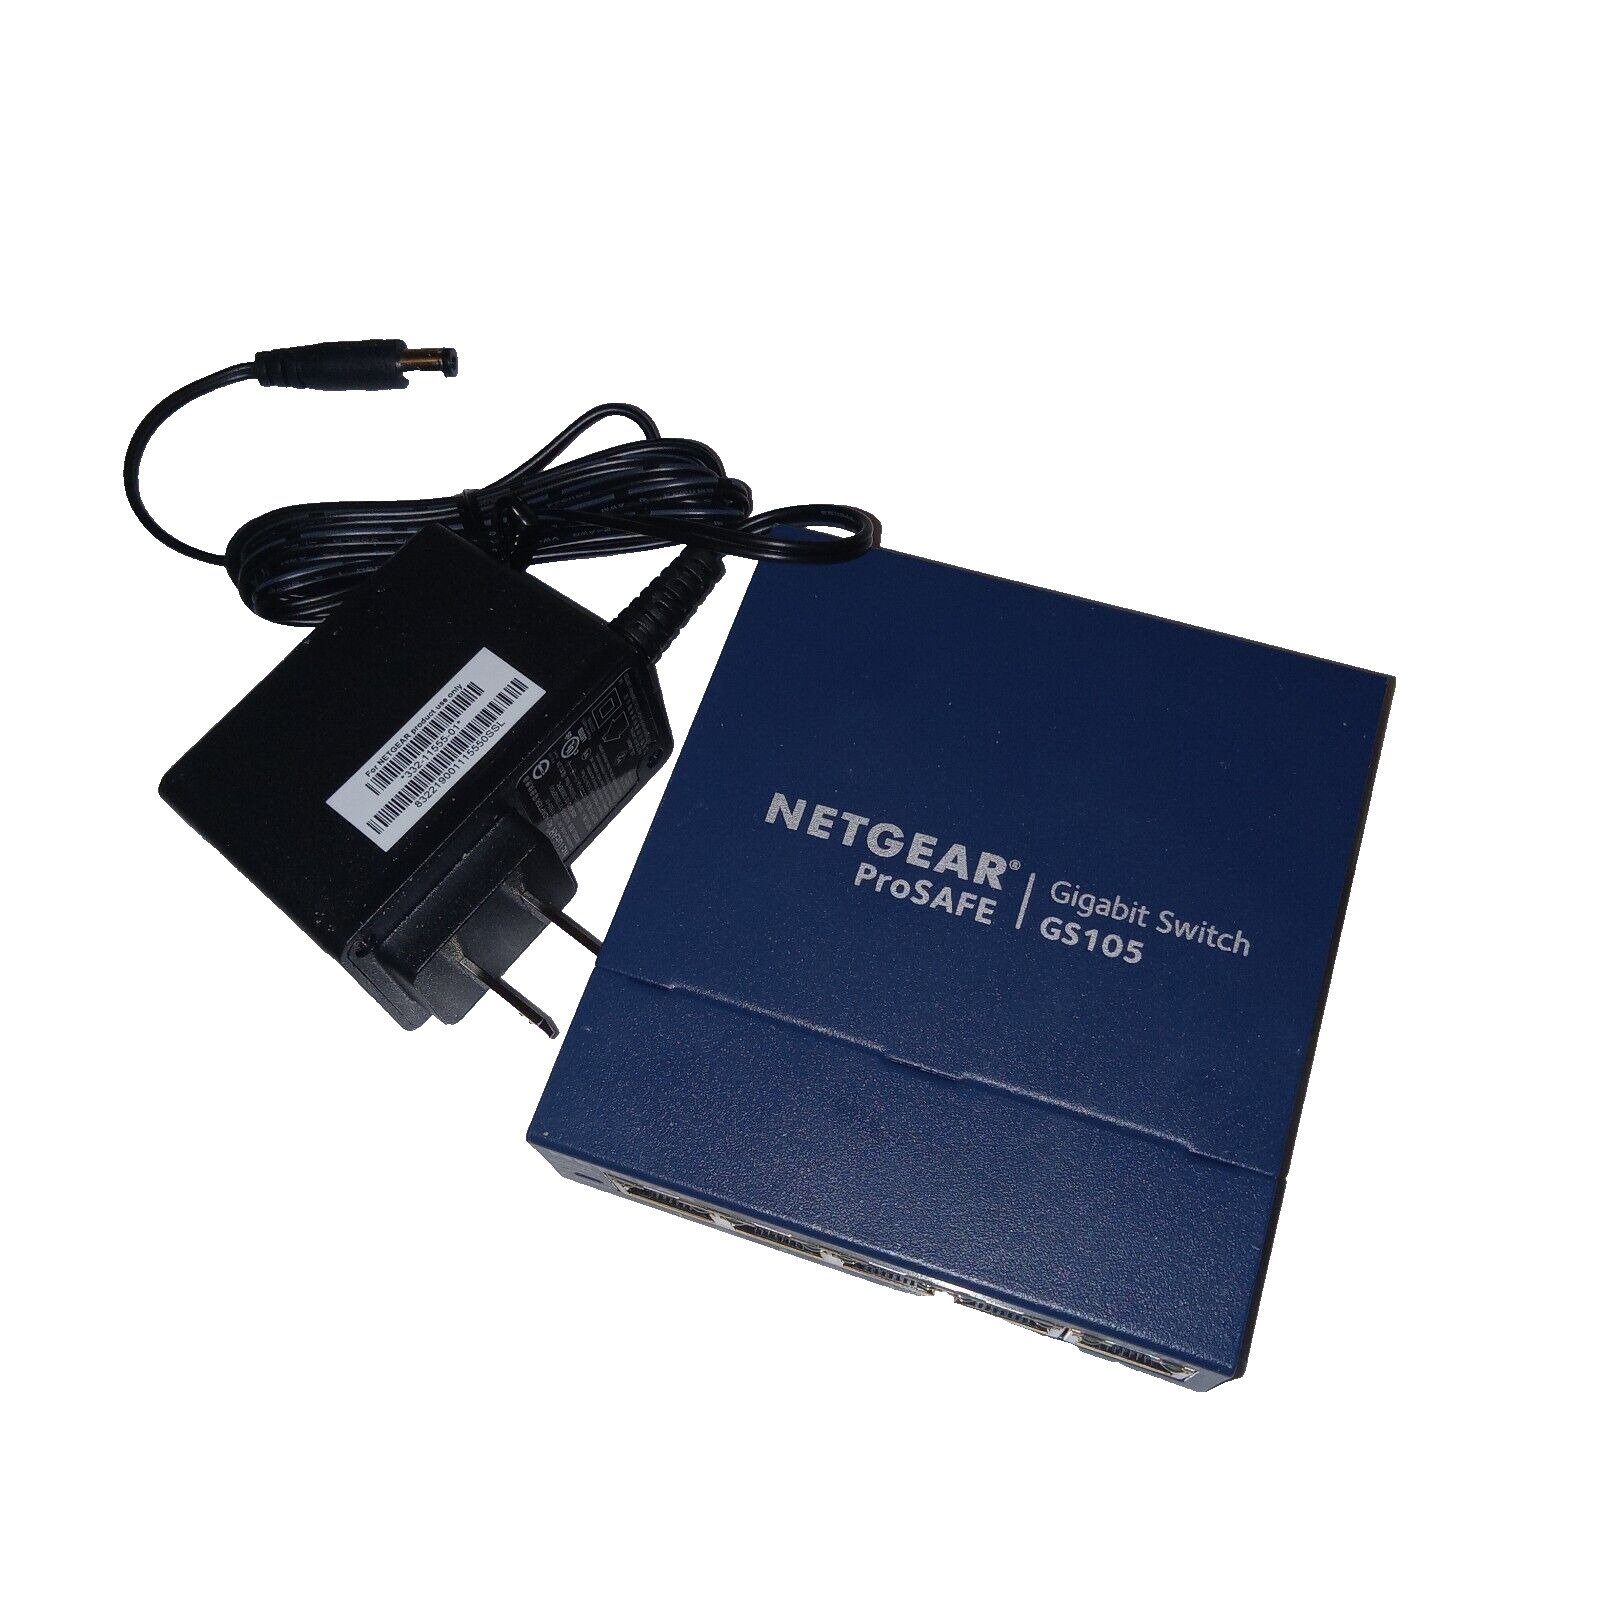 NETGEAR ProSafe 5-Port Gigabit Unmanaged Switch Series GS105v5 With AC adapter